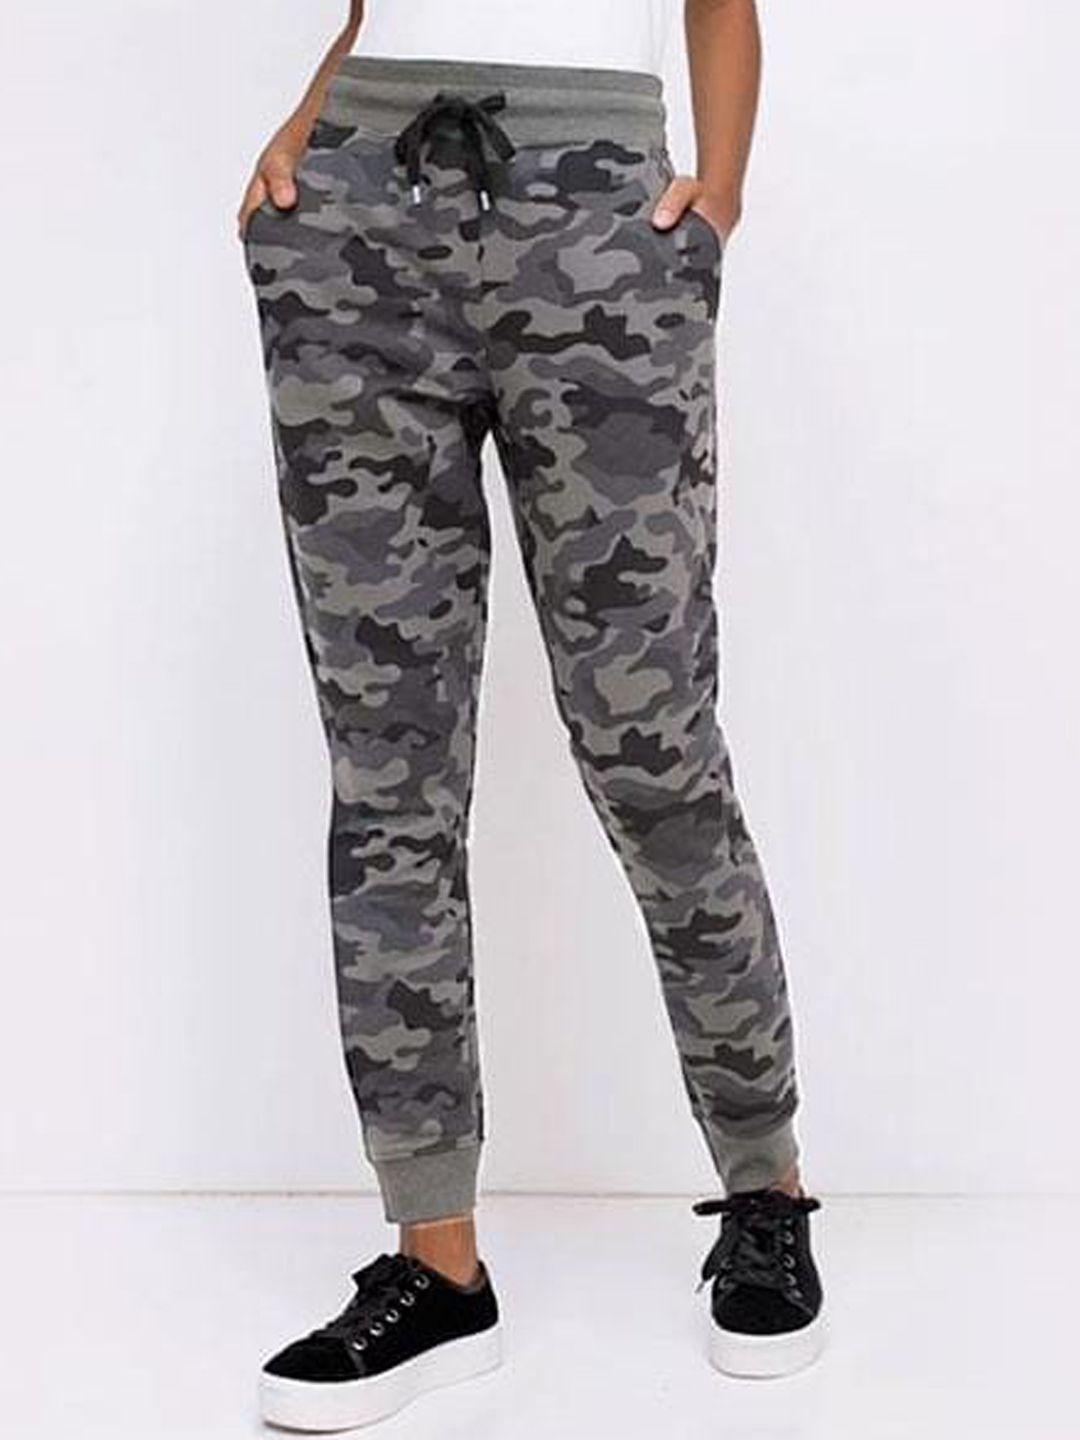 nobero women camouflage printed joggers trousers